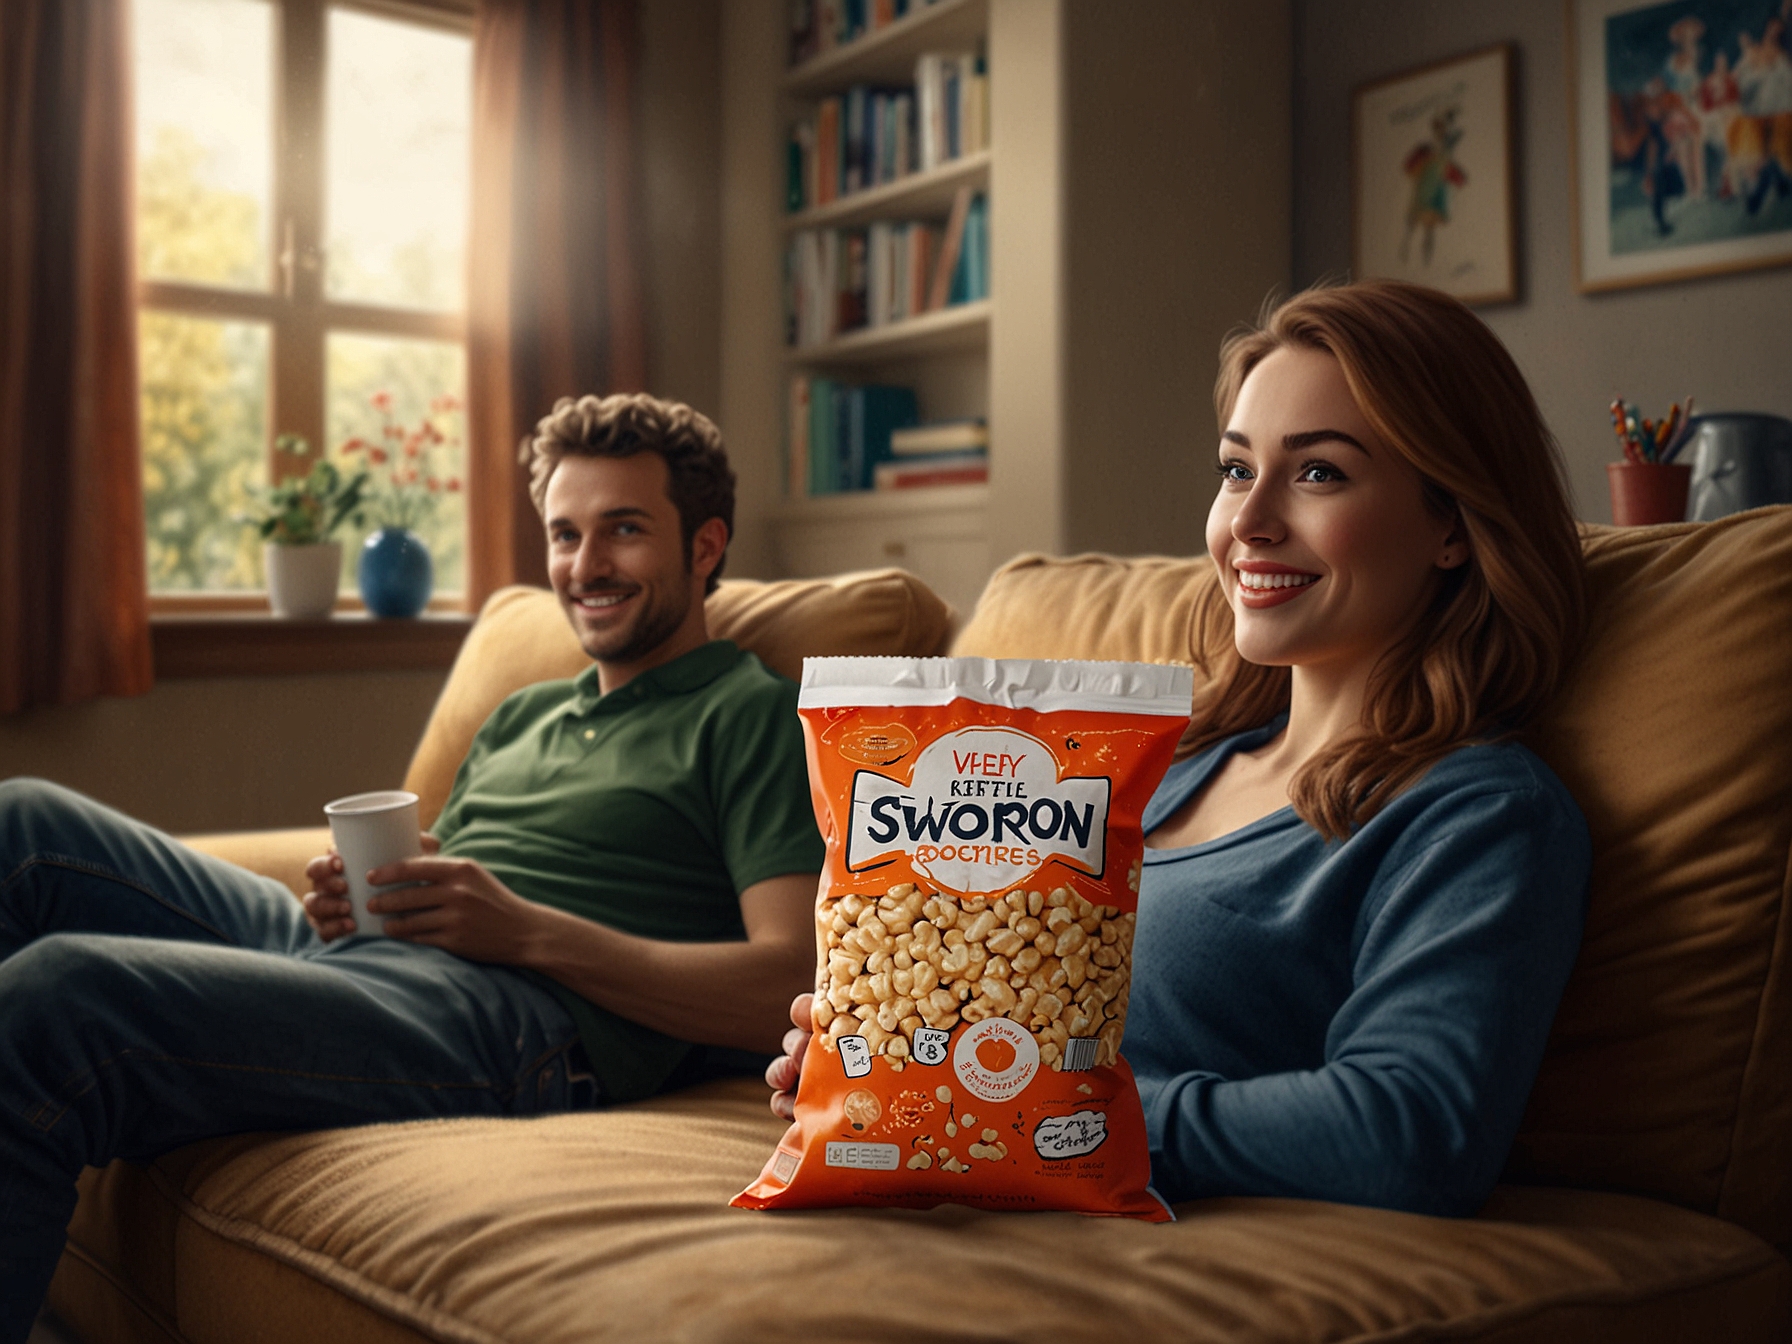 A bag of Swoonworthy Cinnamon Kettle popcorn held by a viewer lounging on a couch, with a Netflix series playing on the TV, illustrating a perfect at-home movie night.